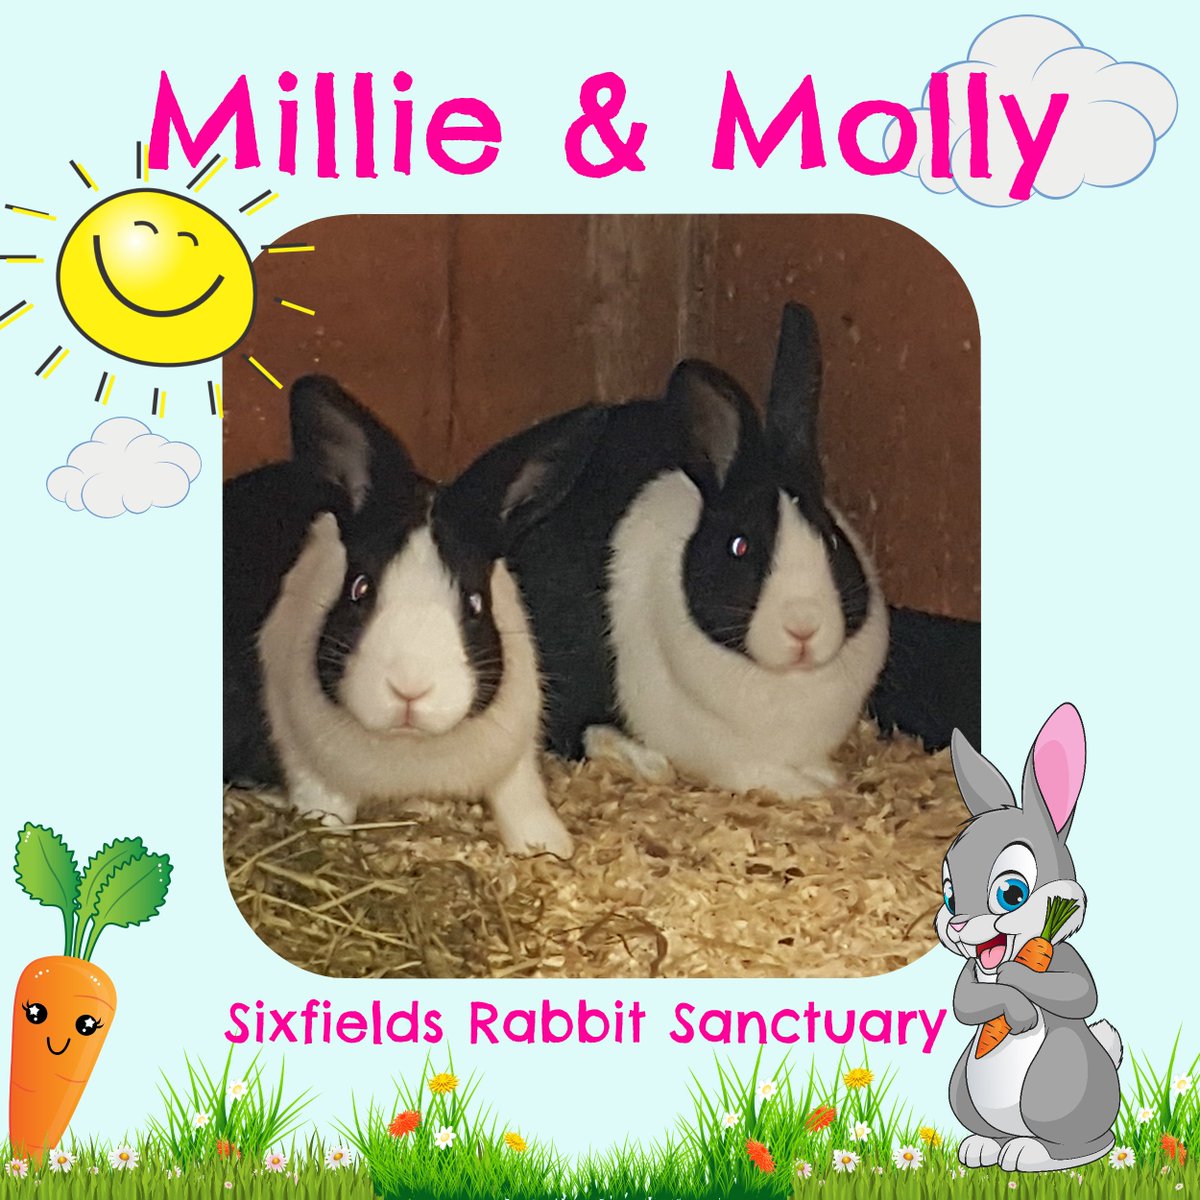 If you would like to make friends with these two great friends then please contact the rescue here donnapilgrim@hotmail.com #Cornwall #bunnylove #rabbits Lots of #bunnies are waiting in rescues and they want a home too. #AdoptDontShop #ADOPT #rescuerabbits Full of fun & affection